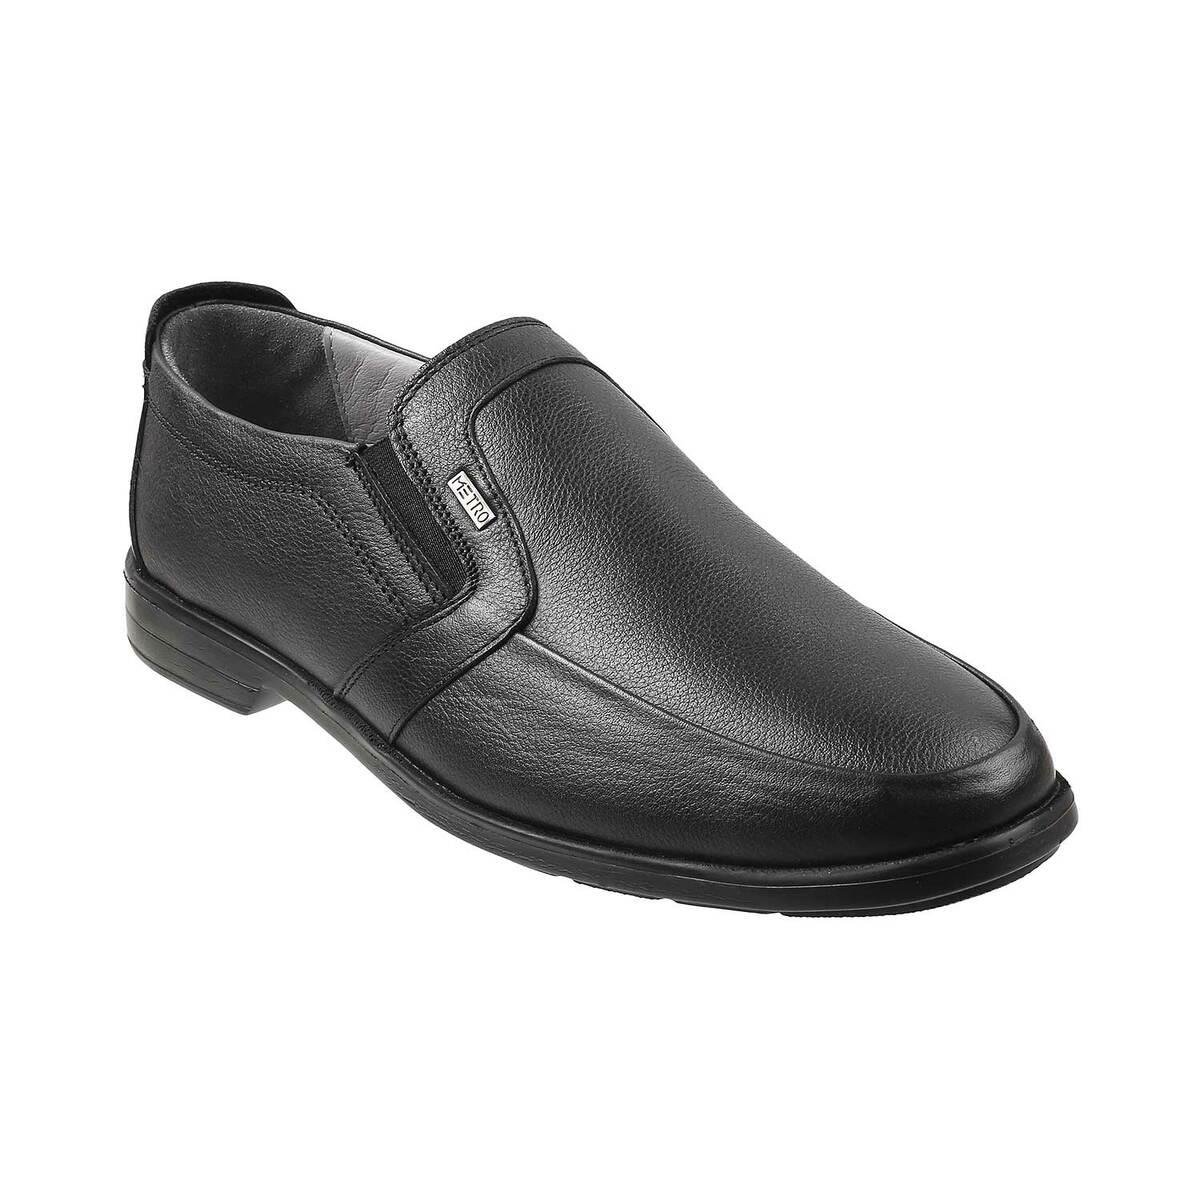 Mens Brown Semi Formal Shoes, Gender : Male, Size : 10, 11, 12, 6, 7, 8, 9  at Rs 435 / Pair in Agra